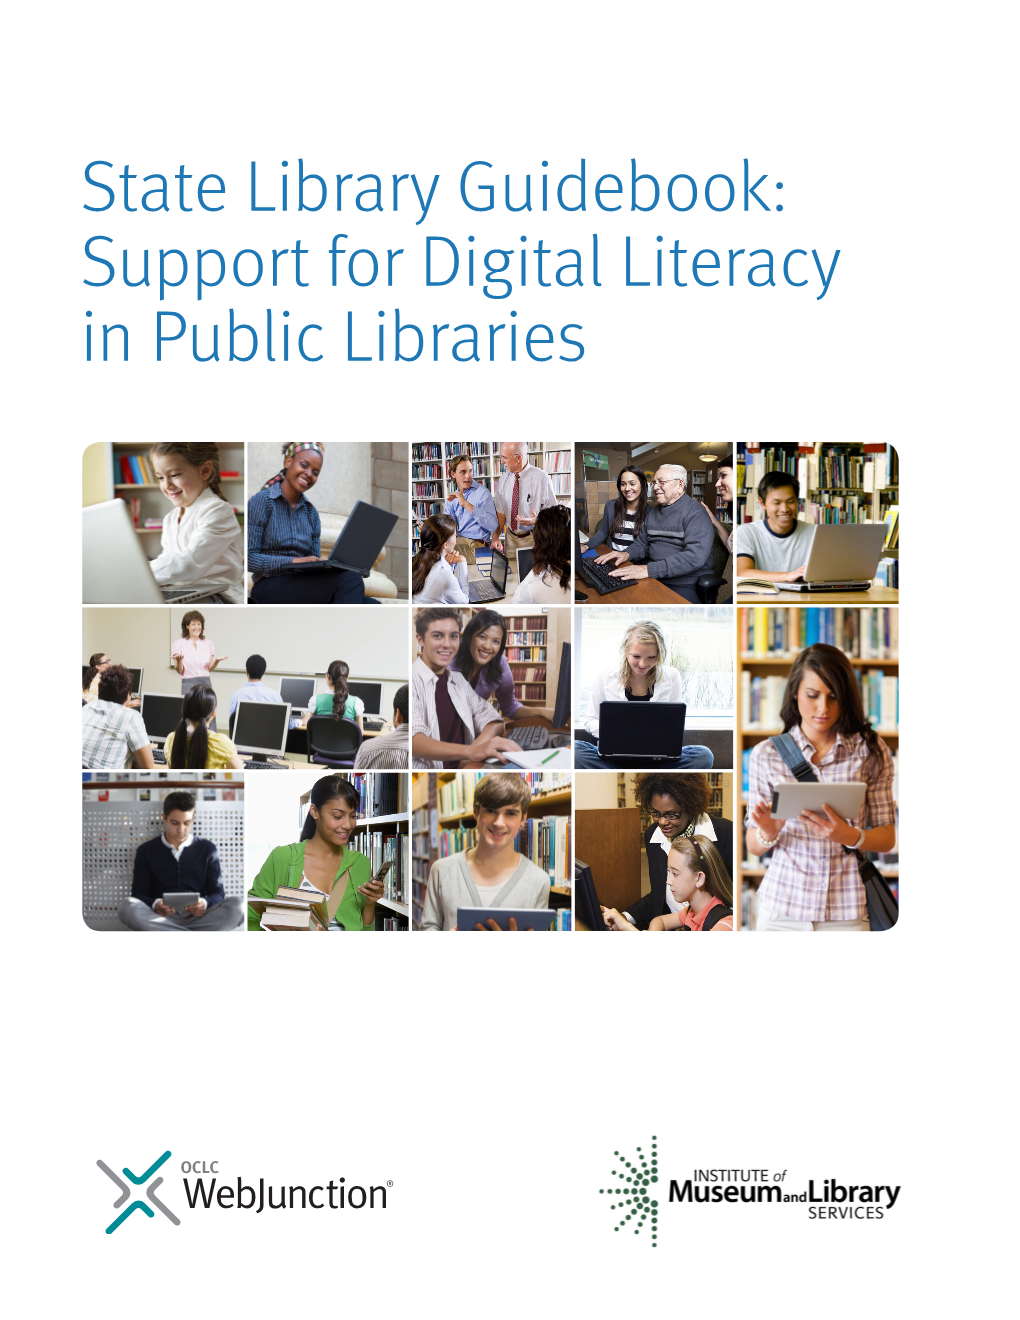 State Library Guidebook: Support for Digital Literacy in Public Libraries